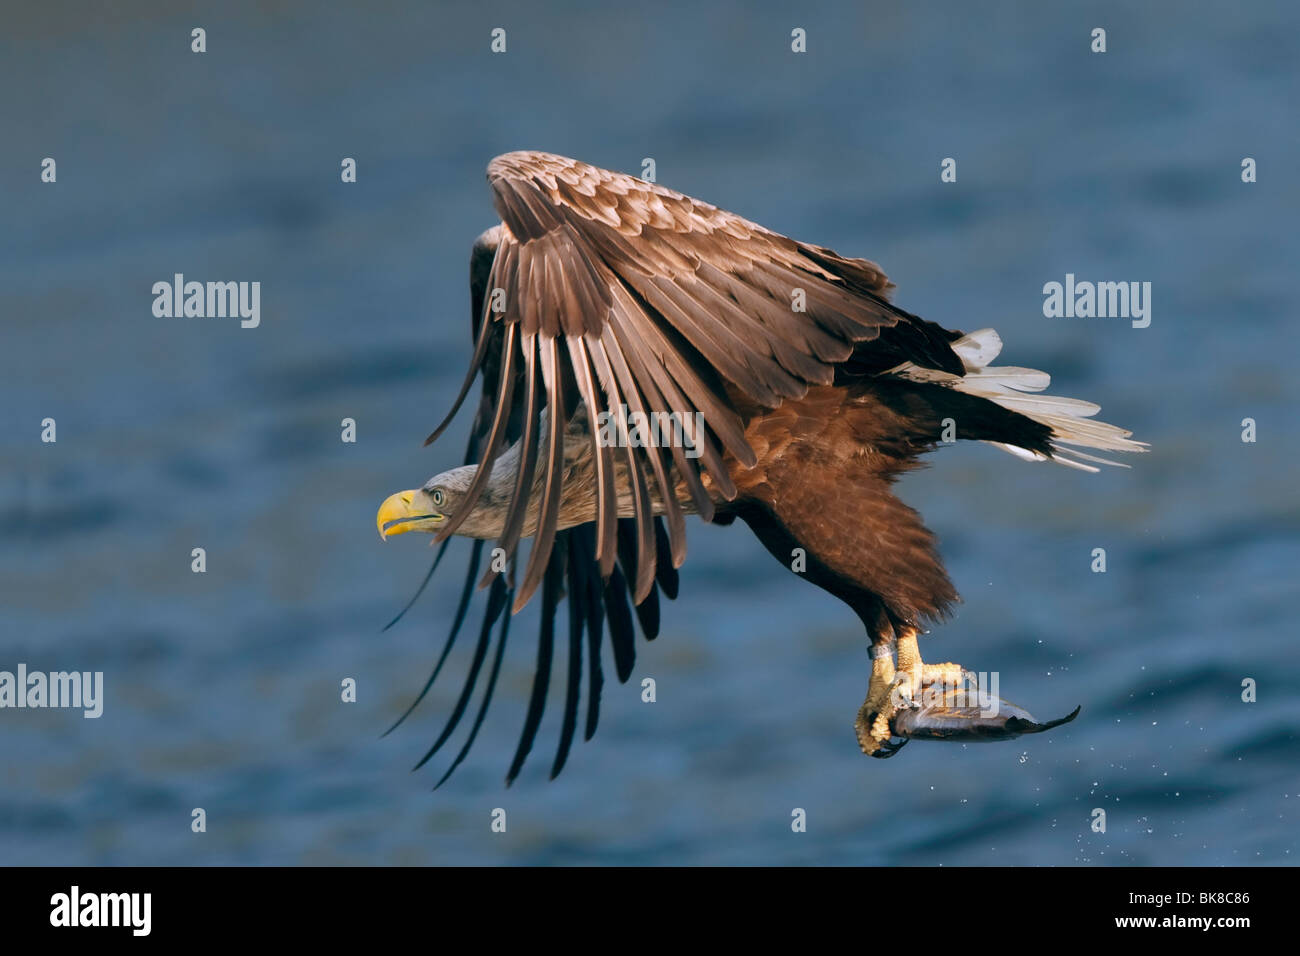 A photograph of white tailed sea eagle carrying a fish against a background of blue sea Stock Photo